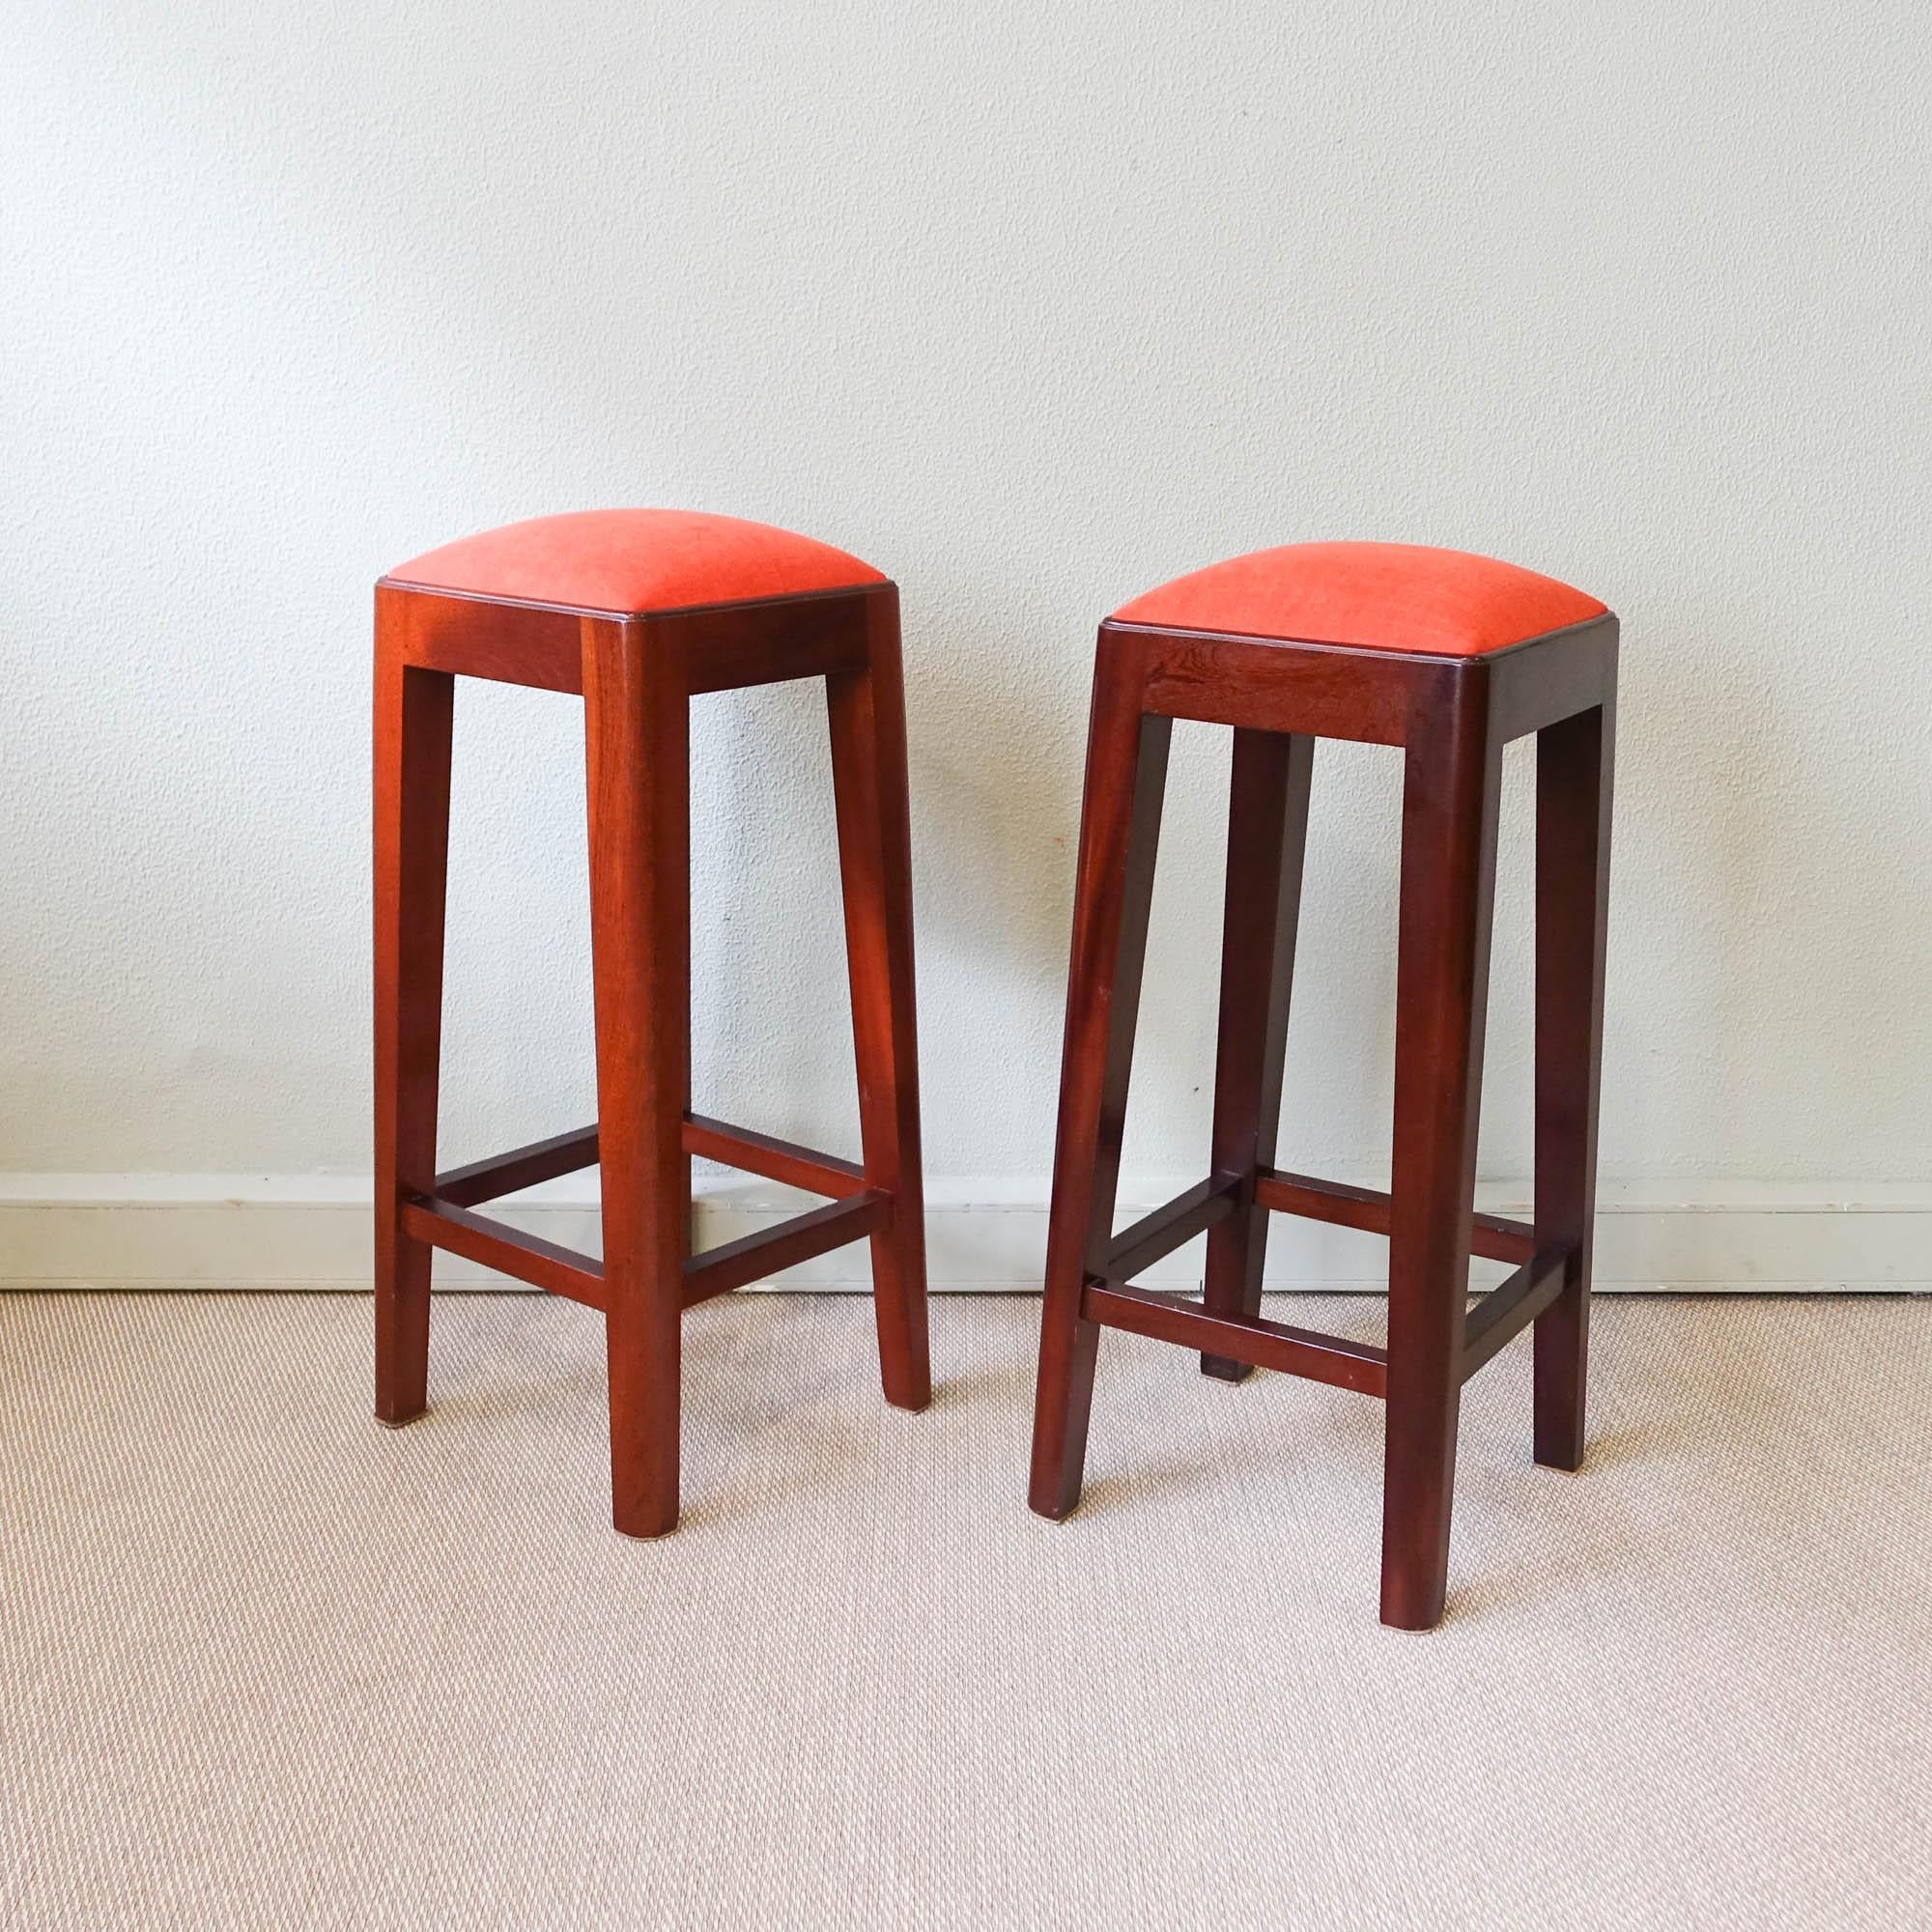 Pair of Vintage Portuguese High Stools, 1960's For Sale 3